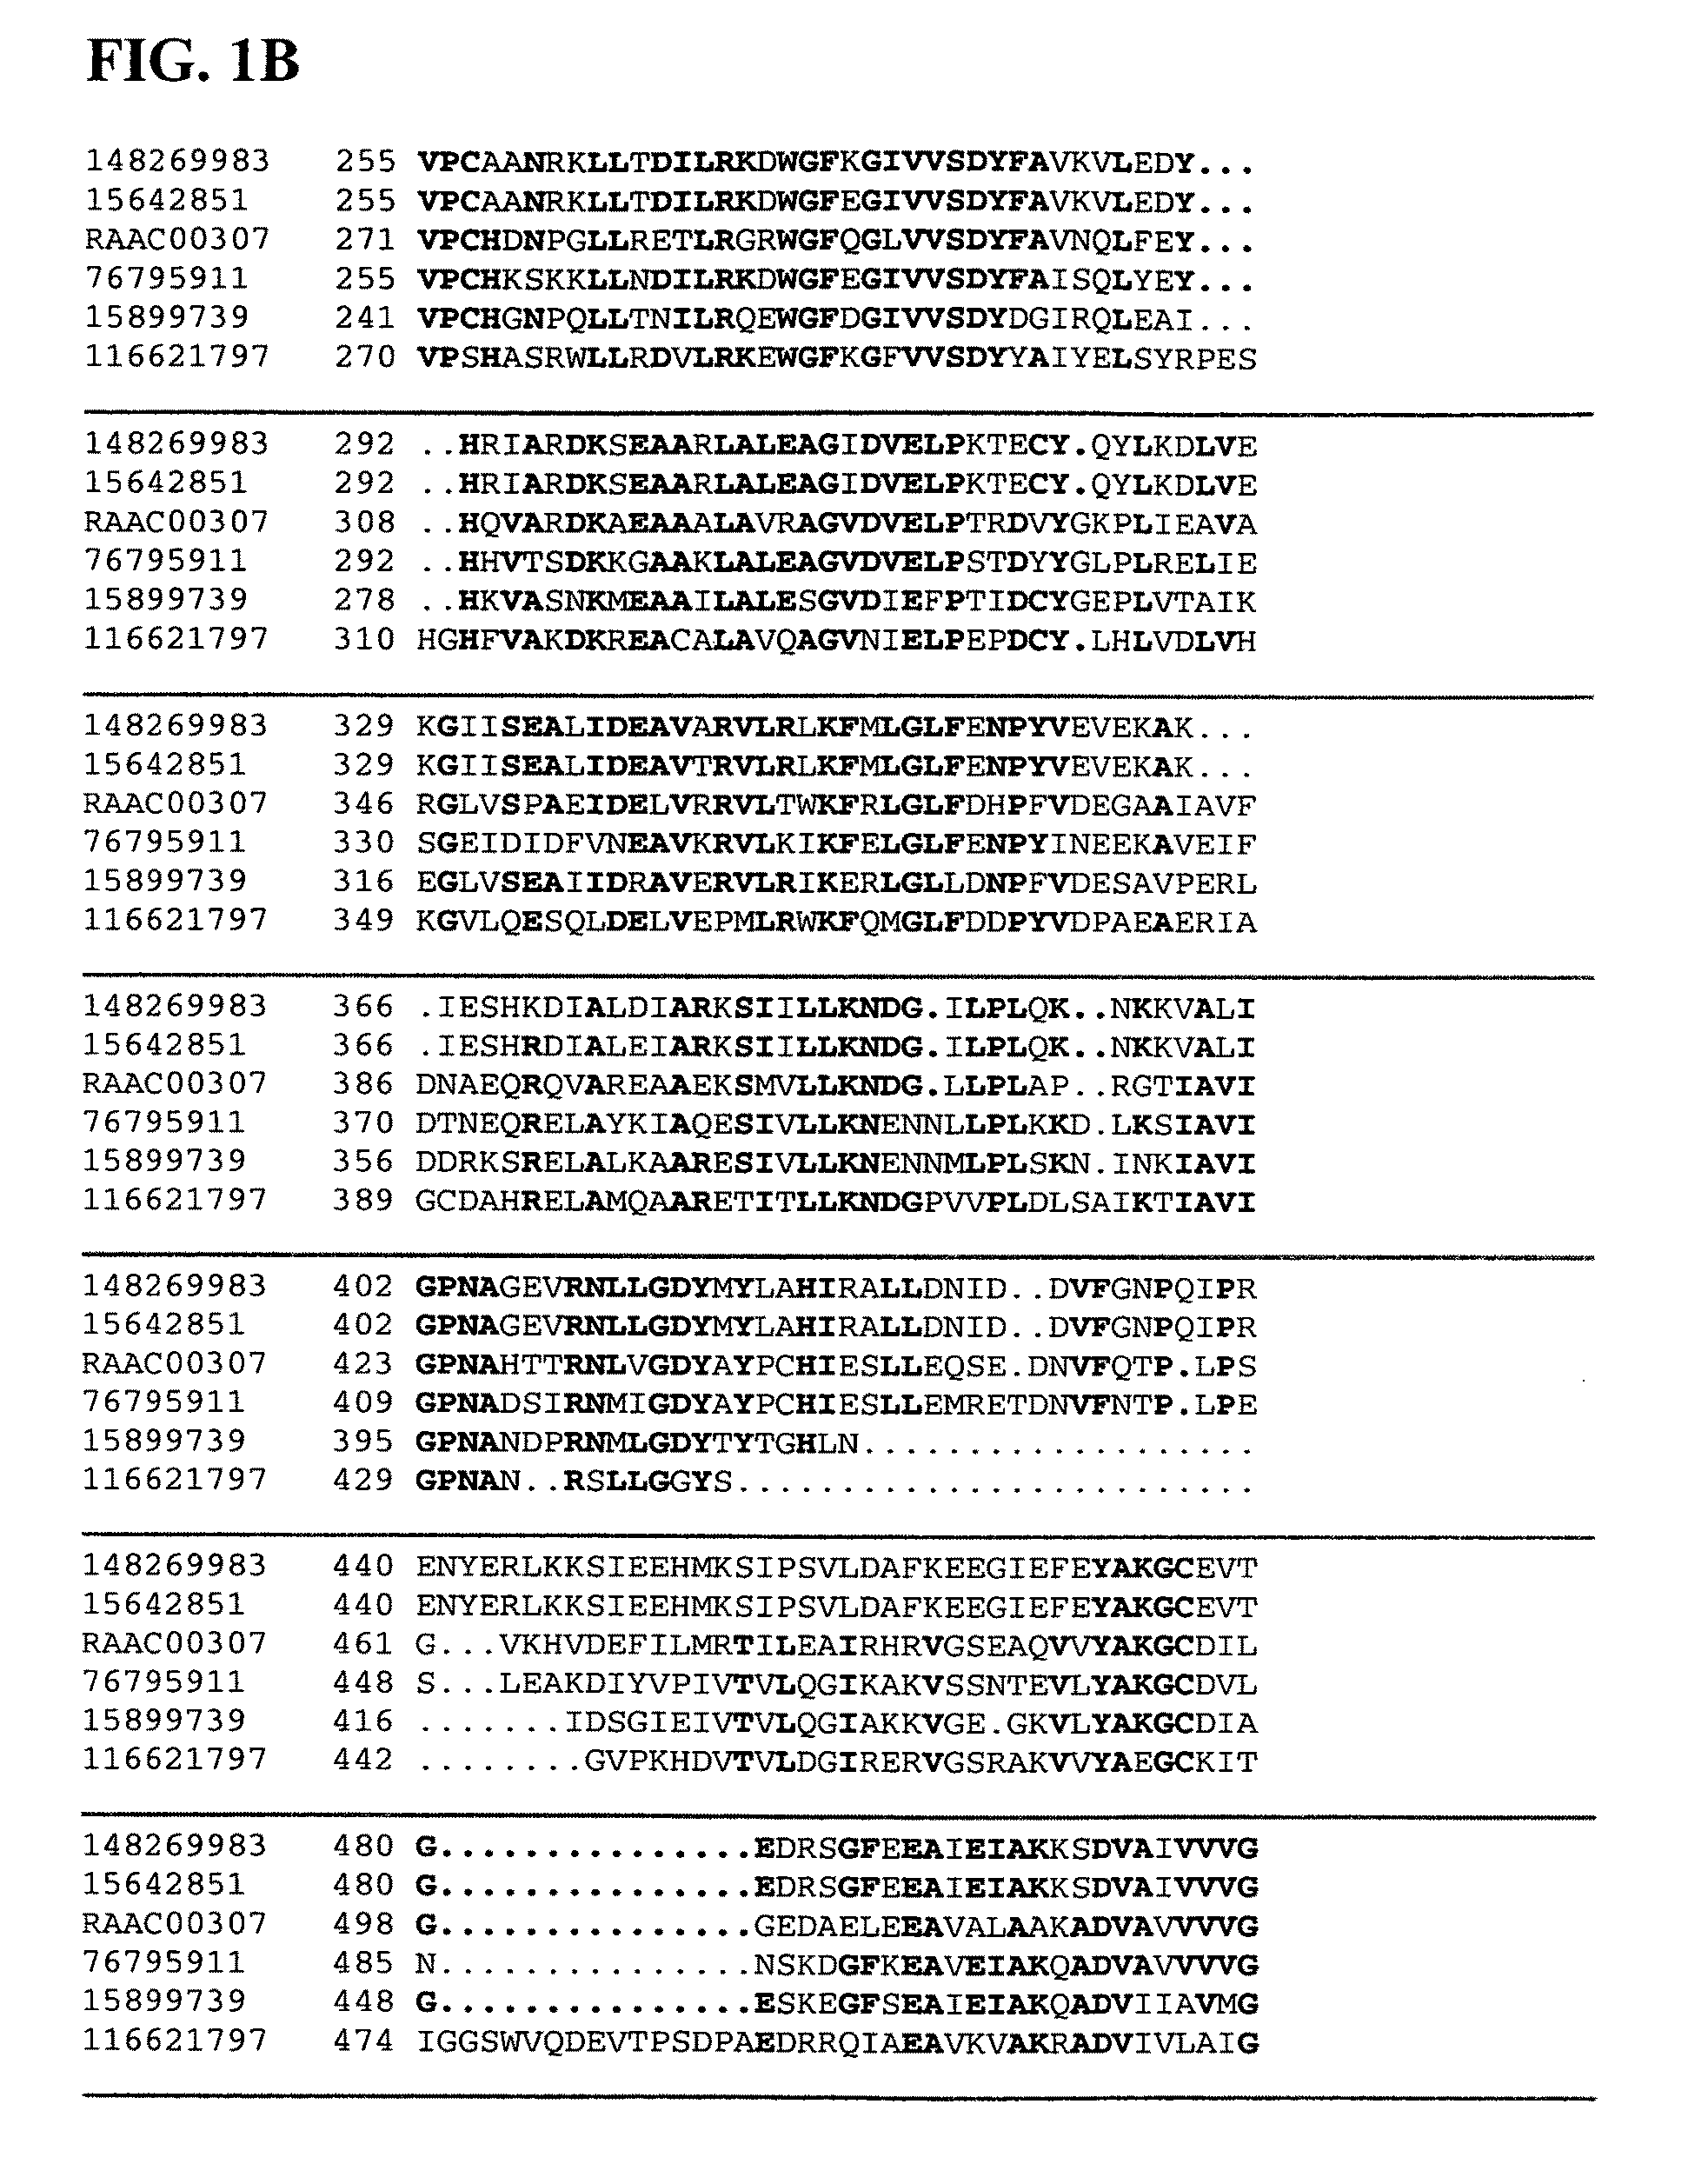 Thermal and acid tolerant beta-xylosidases, genes encoding, related organisms, and methods